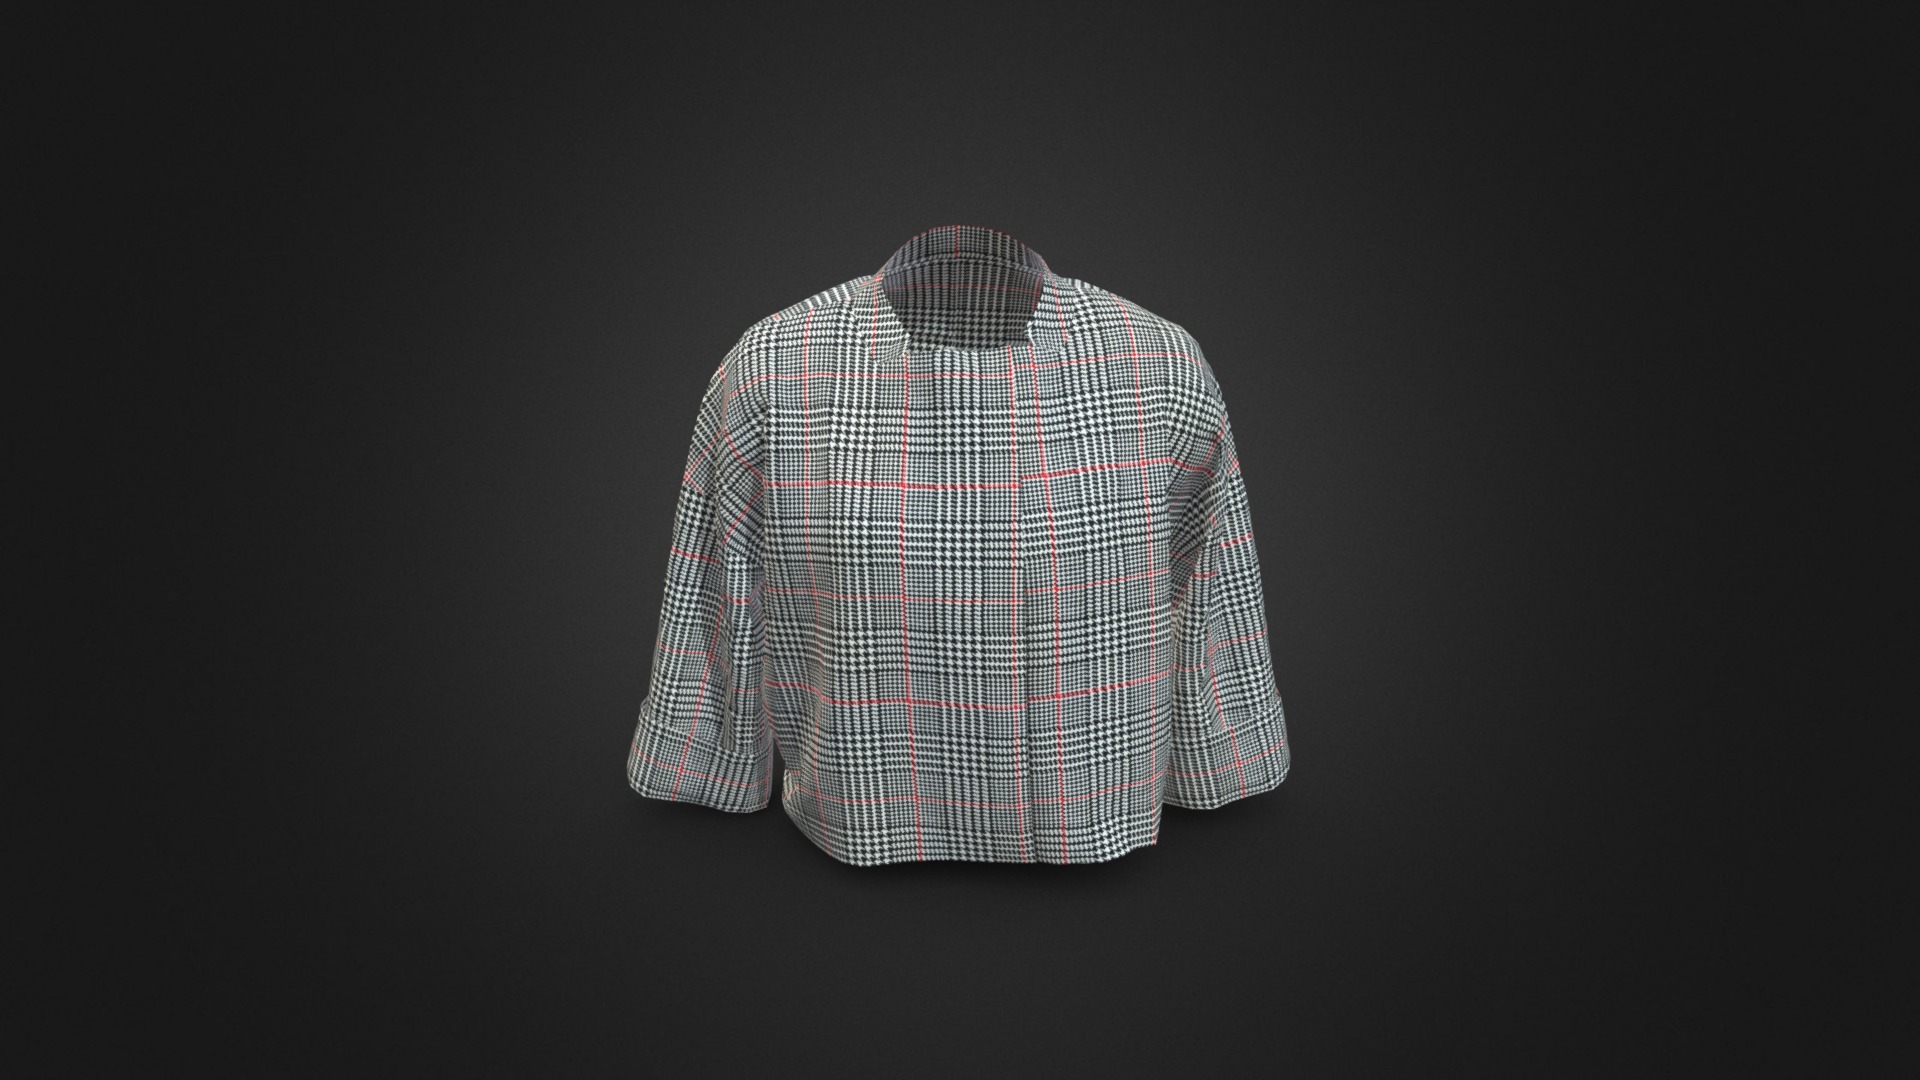 3D model Women short jacket - This is a 3D model of the Women short jacket. The 3D model is about a plaid shirt with a white and red design.